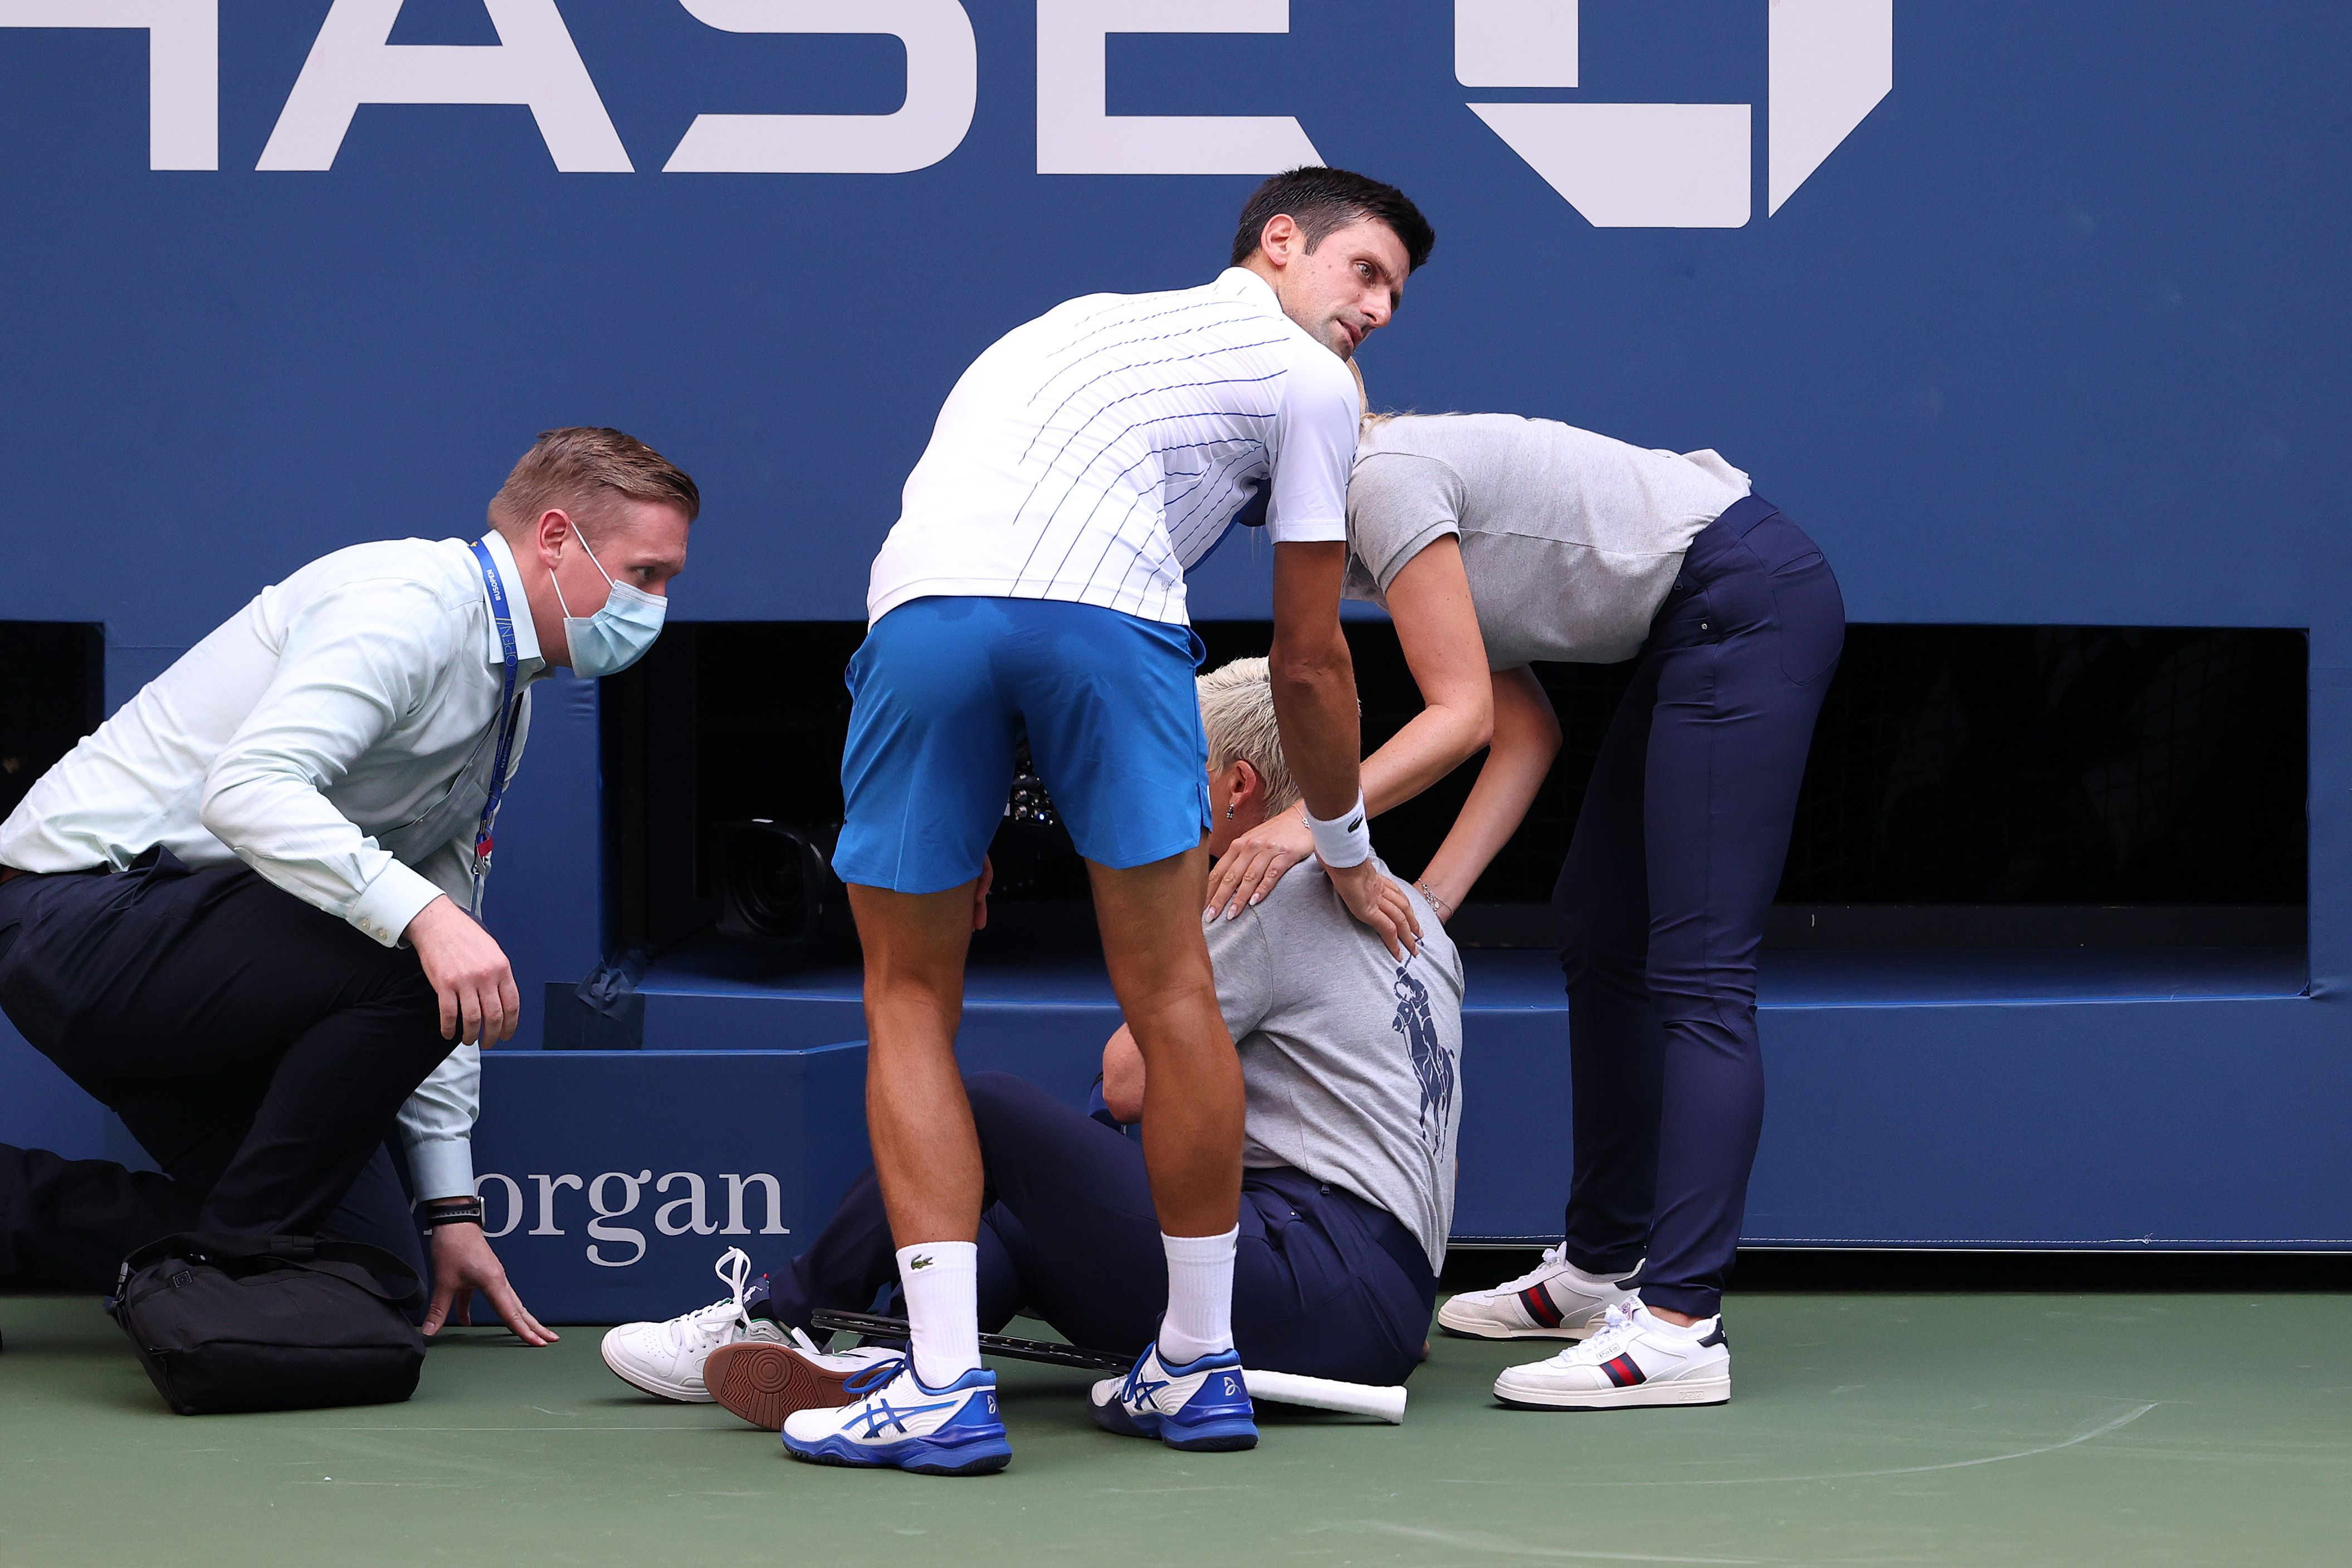 Novak Djokovic out of US Open for accidentally hitting line judge with ball